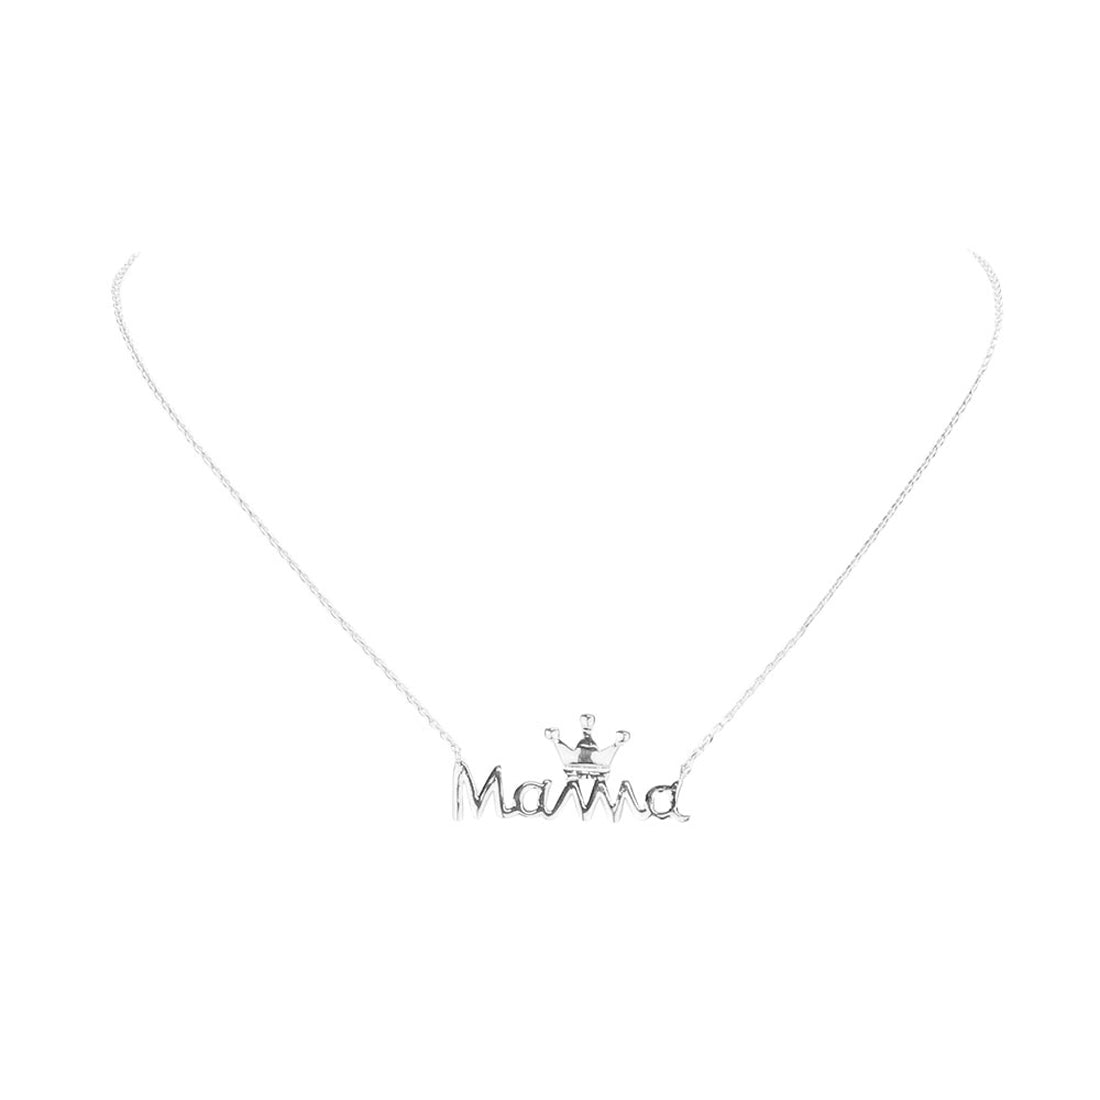 Rhodium White Gold Dipped Metal Crown MAMA Message Pendant Necklace, Make your Mom feel special with this gorgeous Dipped Crown Pendant Necklace gift! Her heart will swell with joy! This piece is versatile and goes with practically anything! This Crown MAMA Pendant Necklace is perfect Mother's Day gift for all the special women in your life, be it mother, wife, sister or daughter.